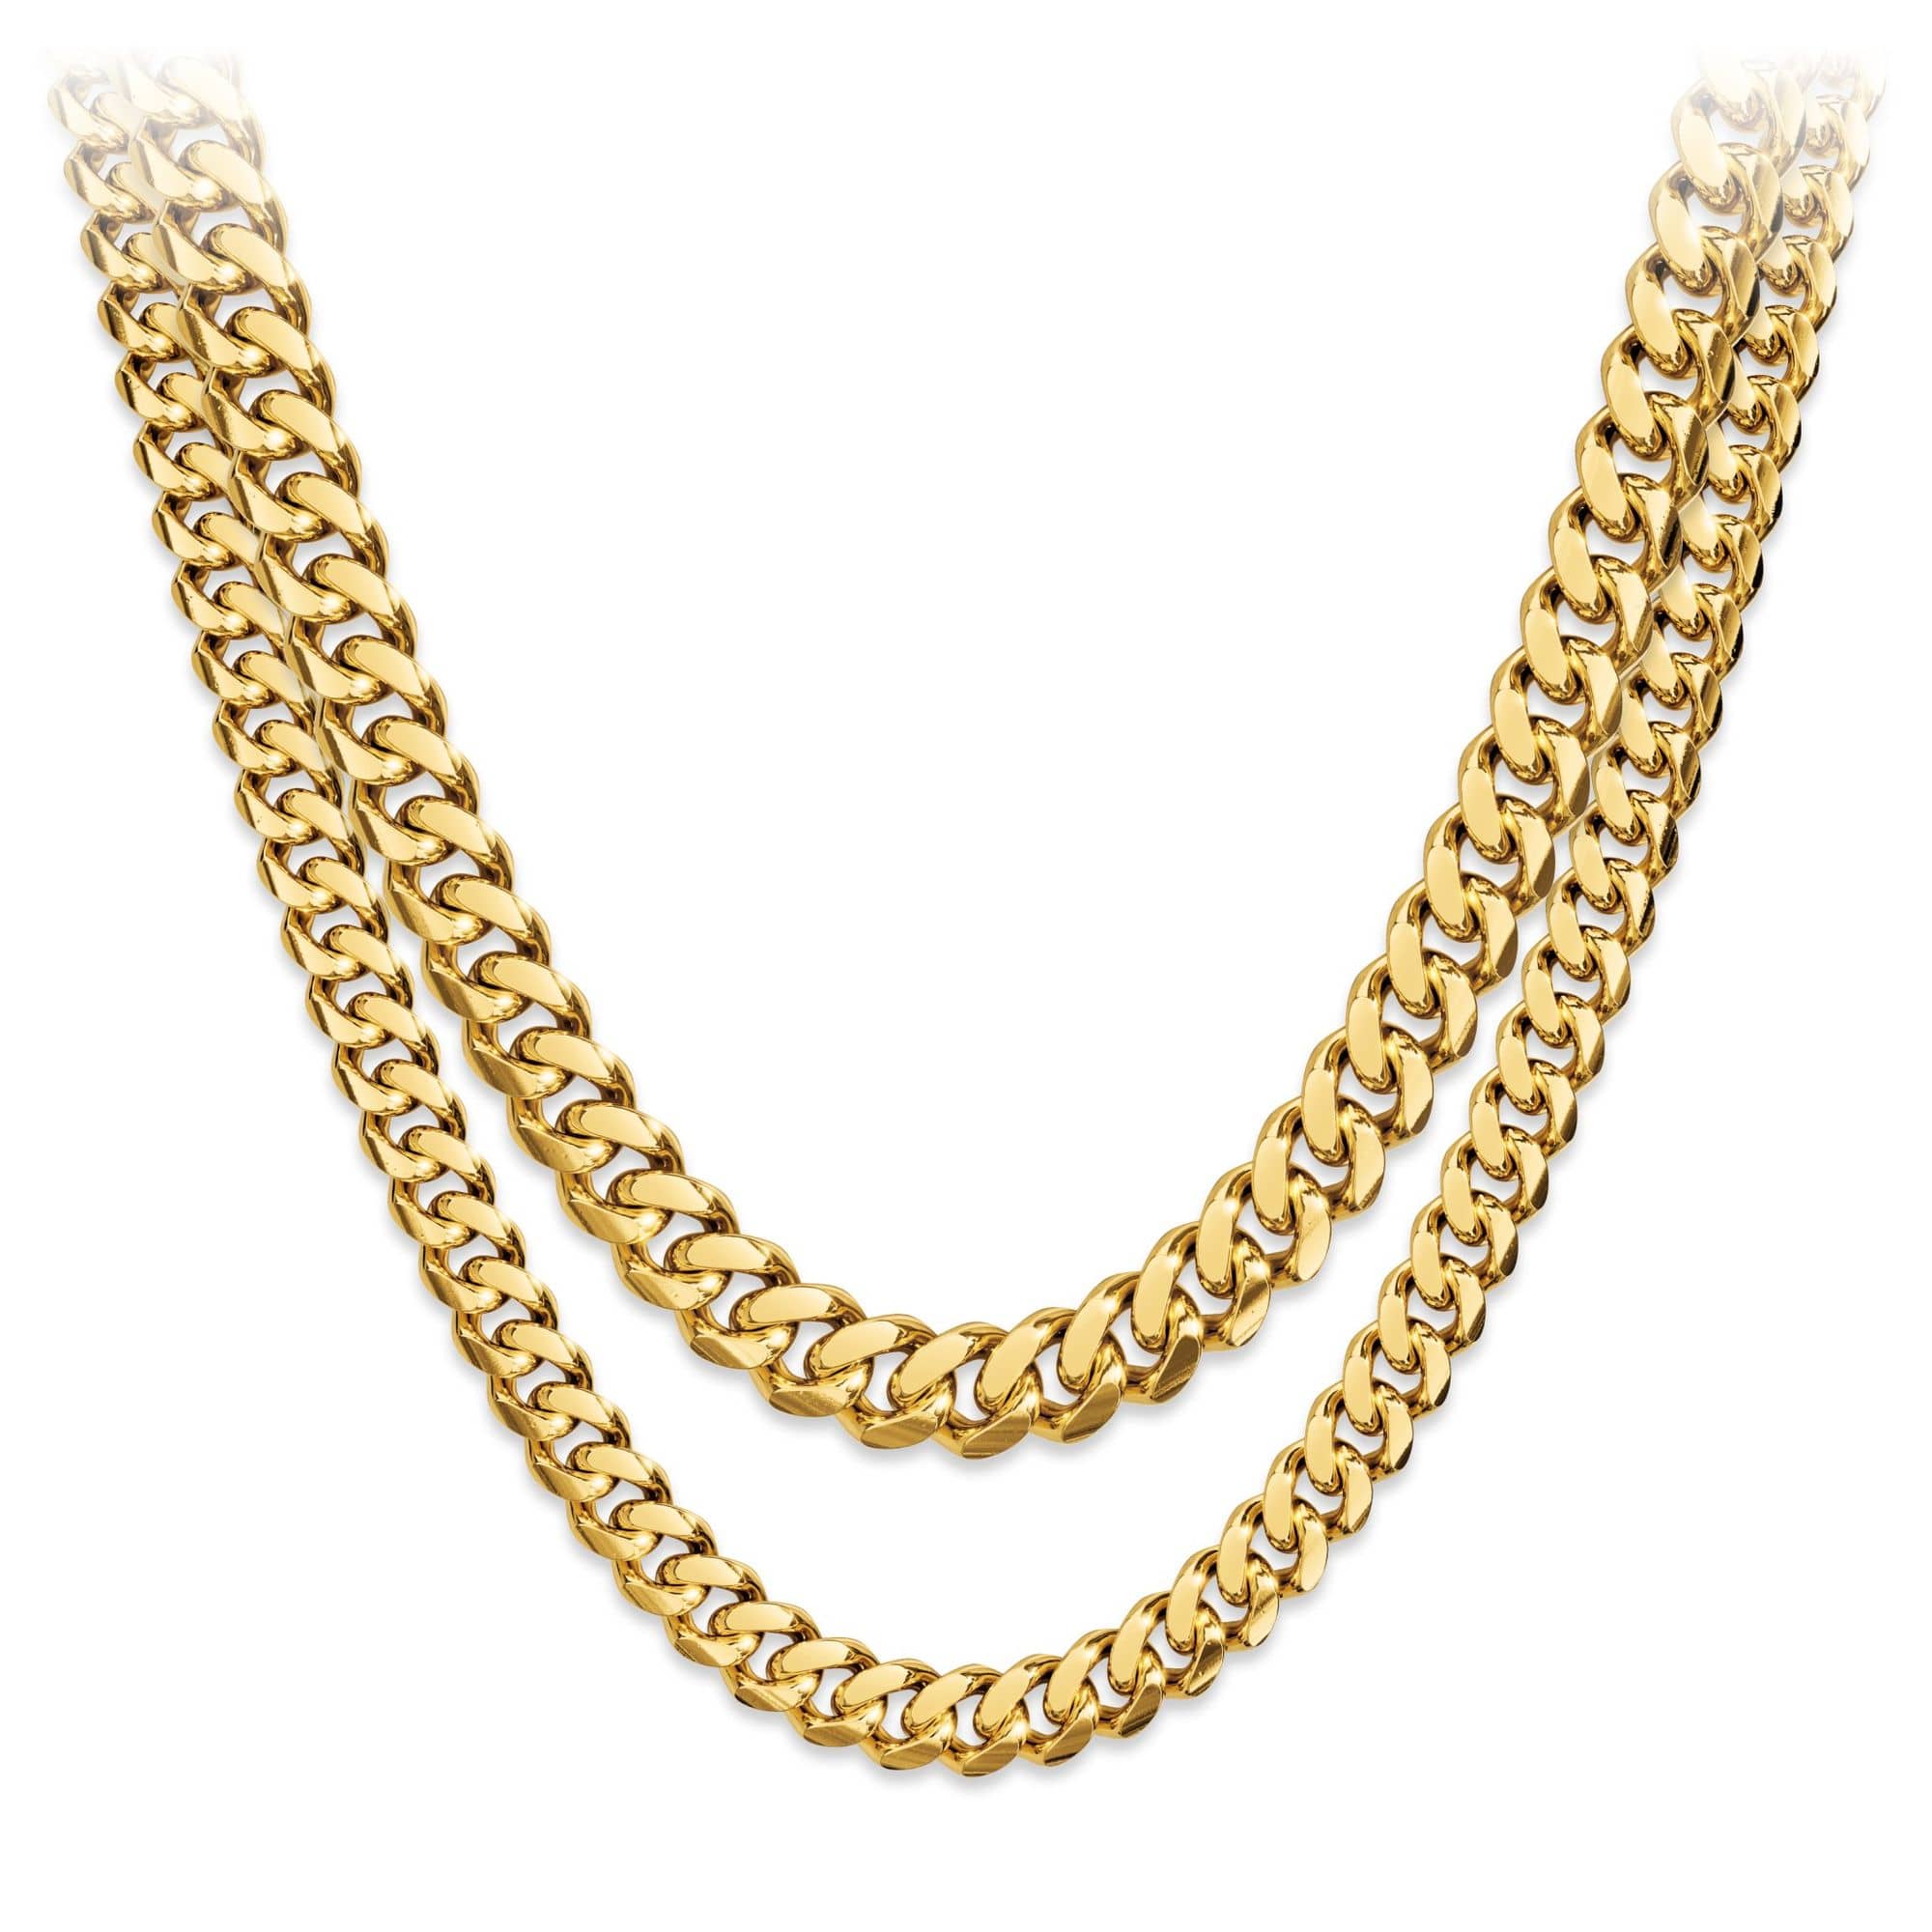 Cuban Stacked Chains - 7mm and 5mm Gold Chain Set